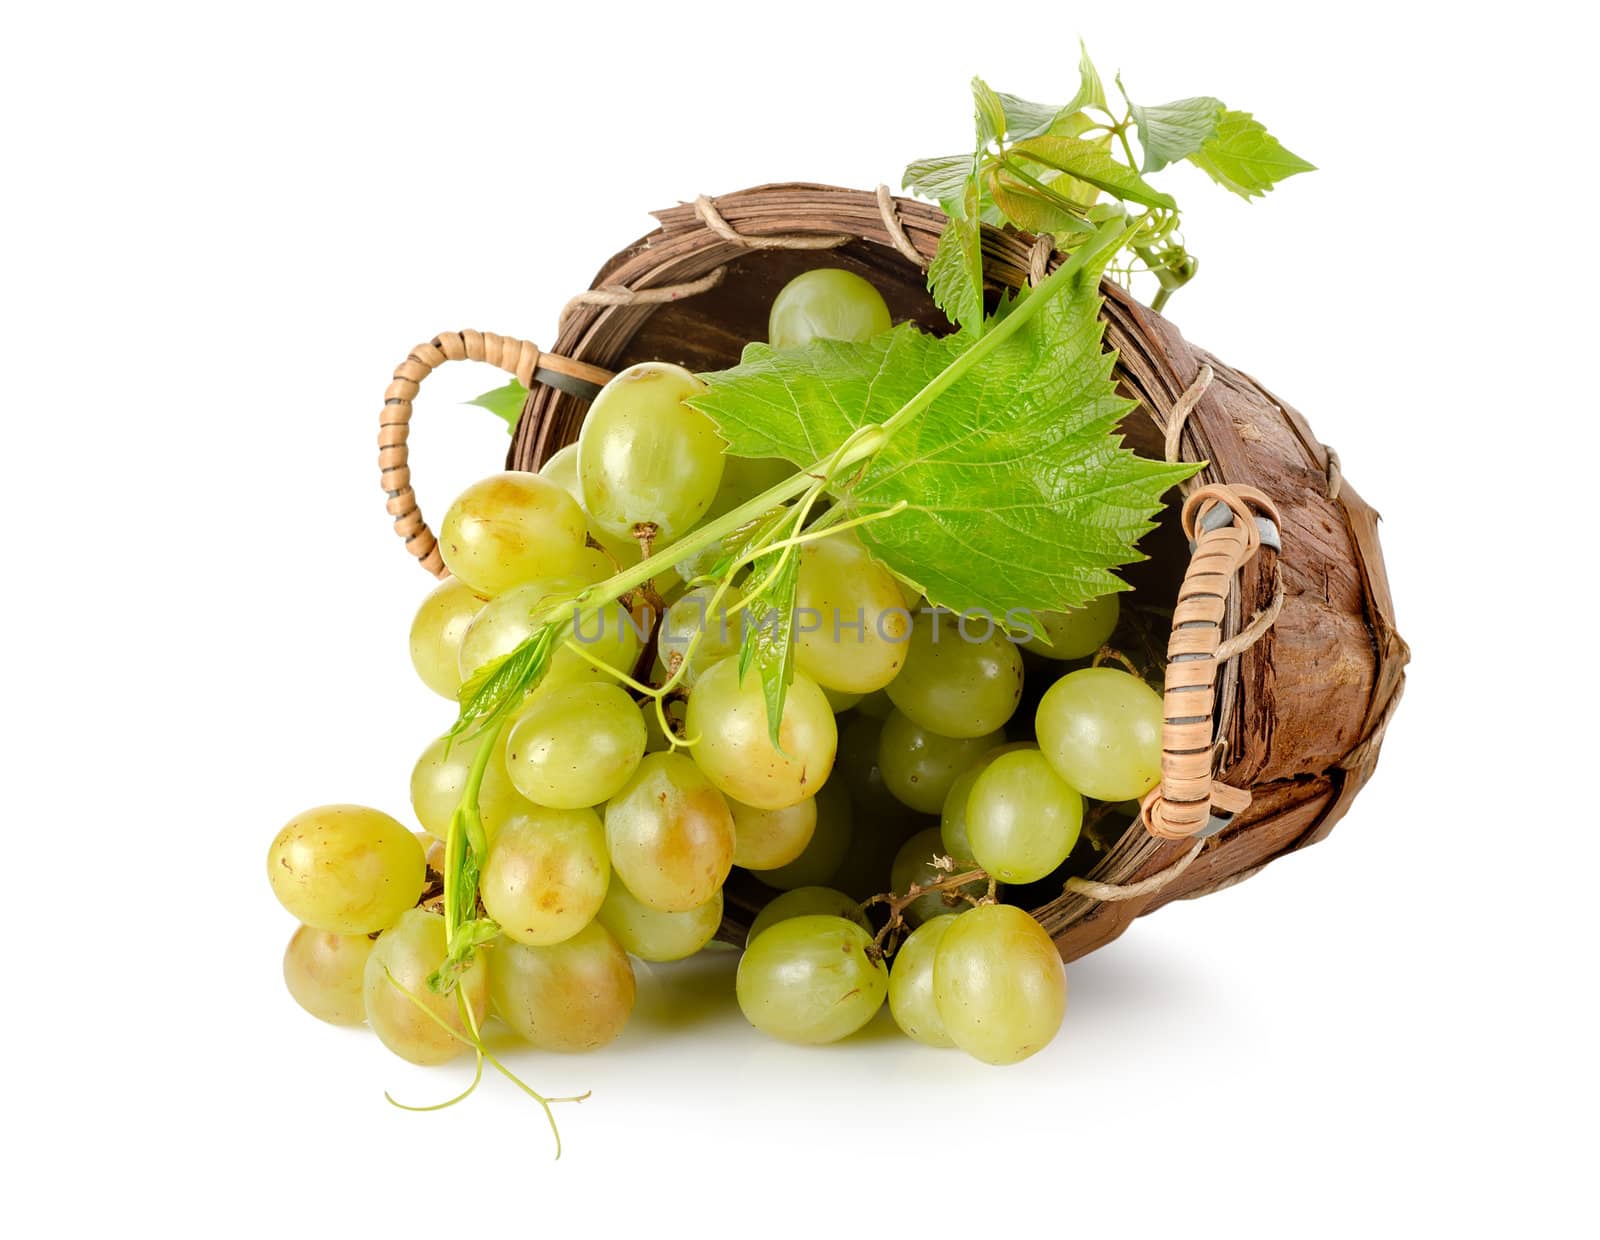 Grapes in a wooden basket by Givaga